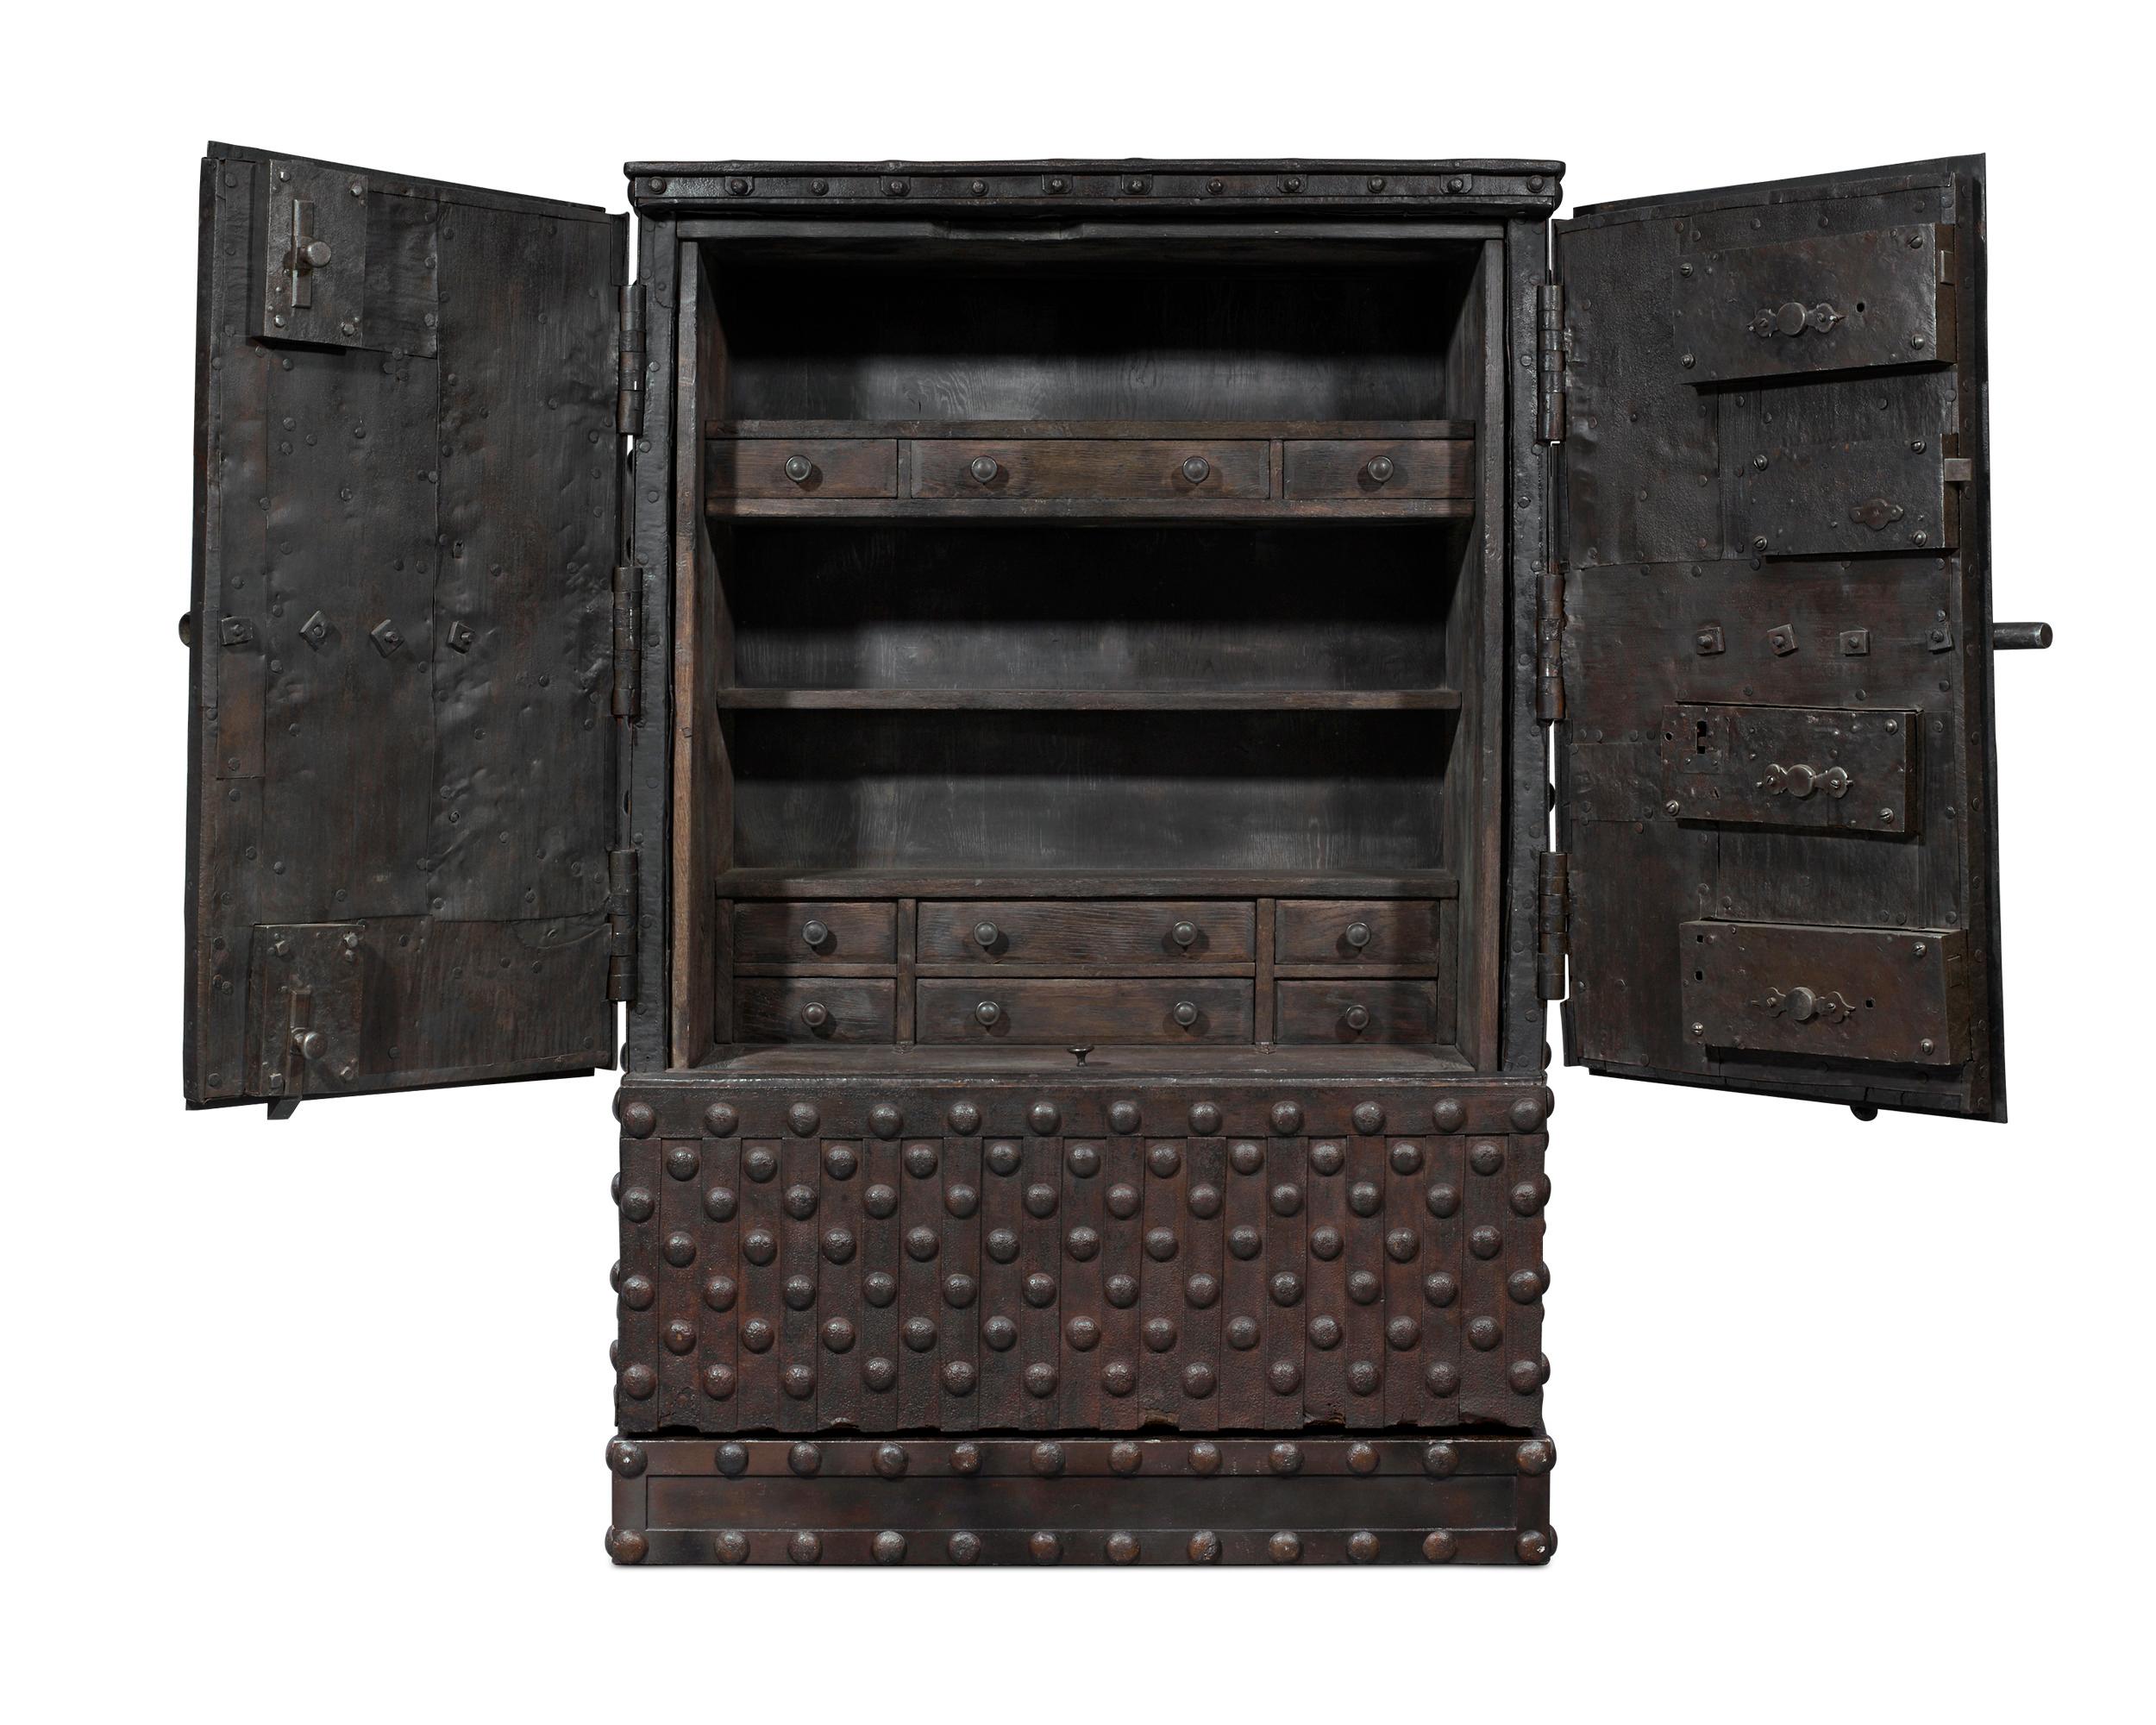 This rare Italian Baroque double-door safe is crafted of reinforced wrought iron and is designed to be virtually indestructible. Intended to secure one's most precious valuables, the fascinating structure is enveloped in thick iron strapwork that